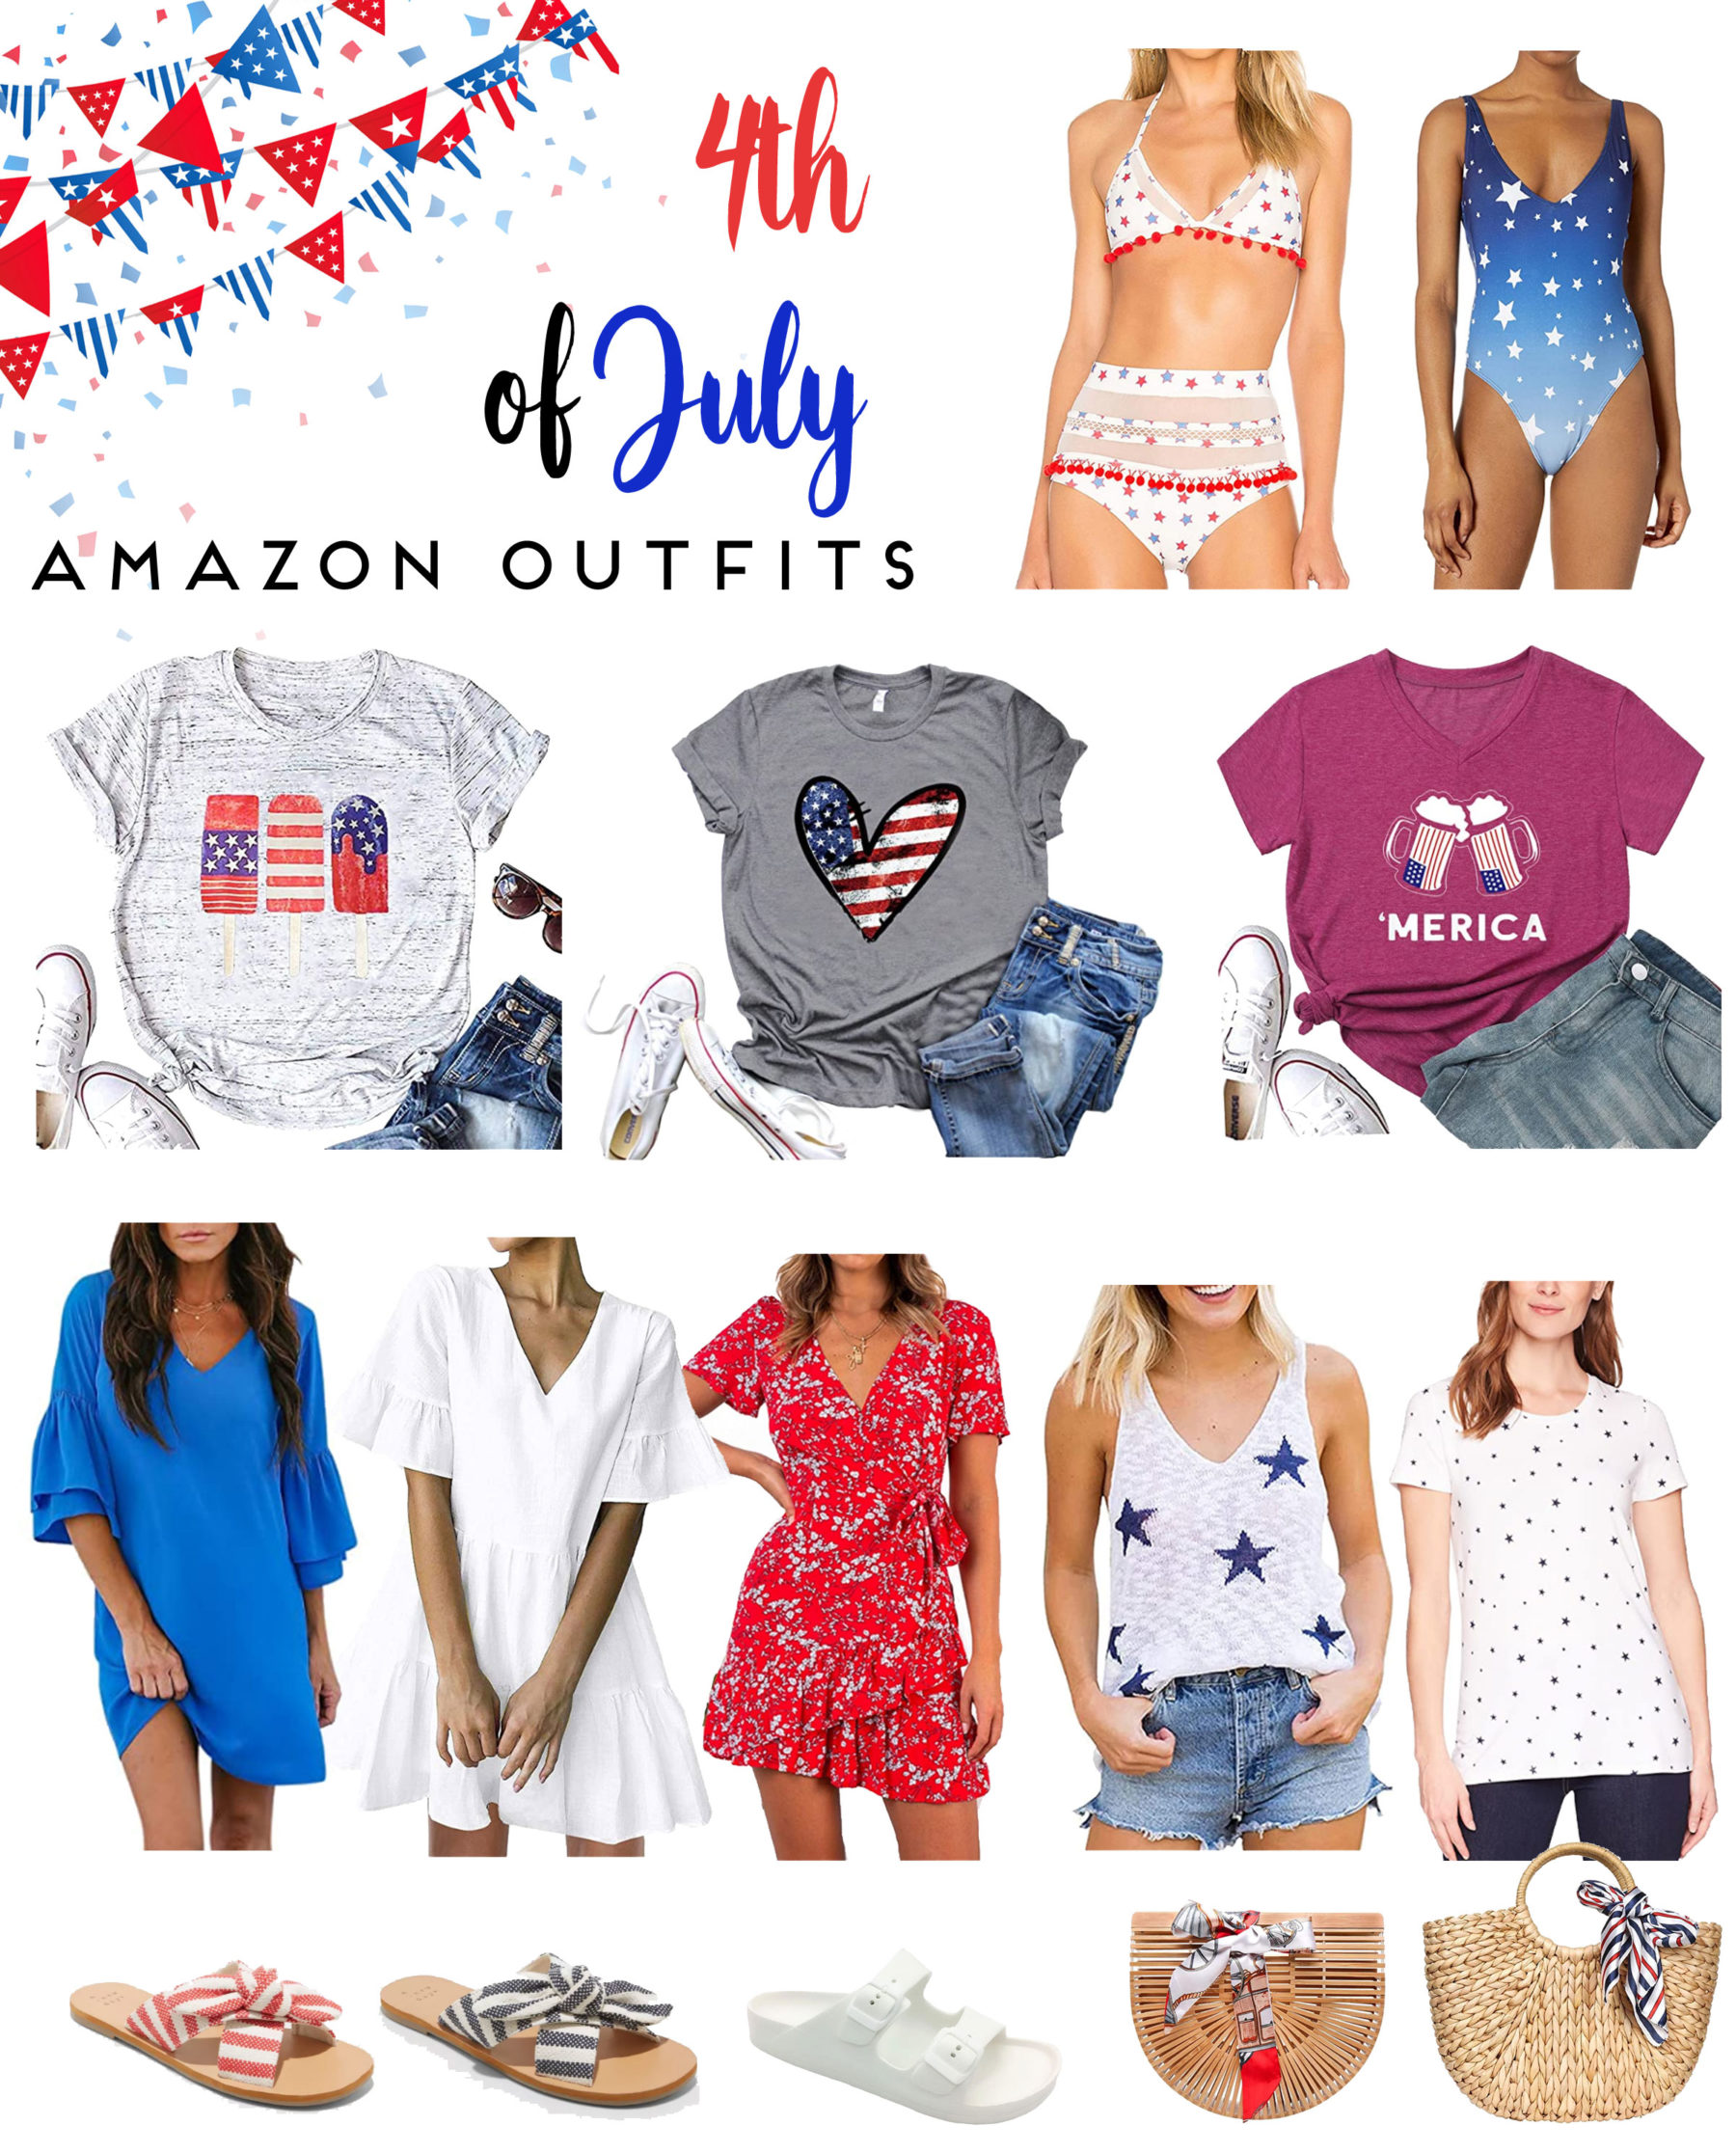 cute & little | dallas petite fashion blogger | cute 4th of july independence day outfit ideas | amazon | 4th of July Outfits by popular Dallas petite fashion blogger, Cute and Little: collage image of a Amazon Halter Tie Back High Waist Triangle Bikini Set, Amazon Rip Curl Women's Rising Star Americana Ombre One Piece Swimsuit, Amazon INMOON Women American Flag Popsicle Graphic Tee, Amazon Womens American Flag T-Shirt, Amazon Women's 4Th of July Short Sleeve American Flag T-Shirt, Amazon BELONGSCI Women's Dress Sweet & Cute V-Neck Bell Sleeve Shift Dress Mini Dress, Amazon FANCYINN Women’s Cute Shift Dress with Pockets Fully Lined Bell Sleeve Ruffle Hem V Neck Loose Swing Tunic Mini Dress, Amazon Relipop Summer Women Short Sleeve Print Dress V Neck Casual Short Dress, Amazon CinShein Womens Vest Summer Knit Tank Tops, Amazon Essentials Women's 2-Pack Classic-Fit Short-Sleeve Crewneck T-Shirt, Target Women's Livia Knotted Bow Slide Sandals, Amazon Obosoyo Women's Handmade Bamboo Handbag Summer Beach Sea Tote Bag, Amazon Summer Rattan Bag for Women Straw Hand-woven Top-handle Handbag Beach Sea Straw Rattan Tote Clutch Bag, and Amazon FUNKYMONKEY Women's Comfort Slides Double Buckle Adjustable EVA Flat Sandals. 